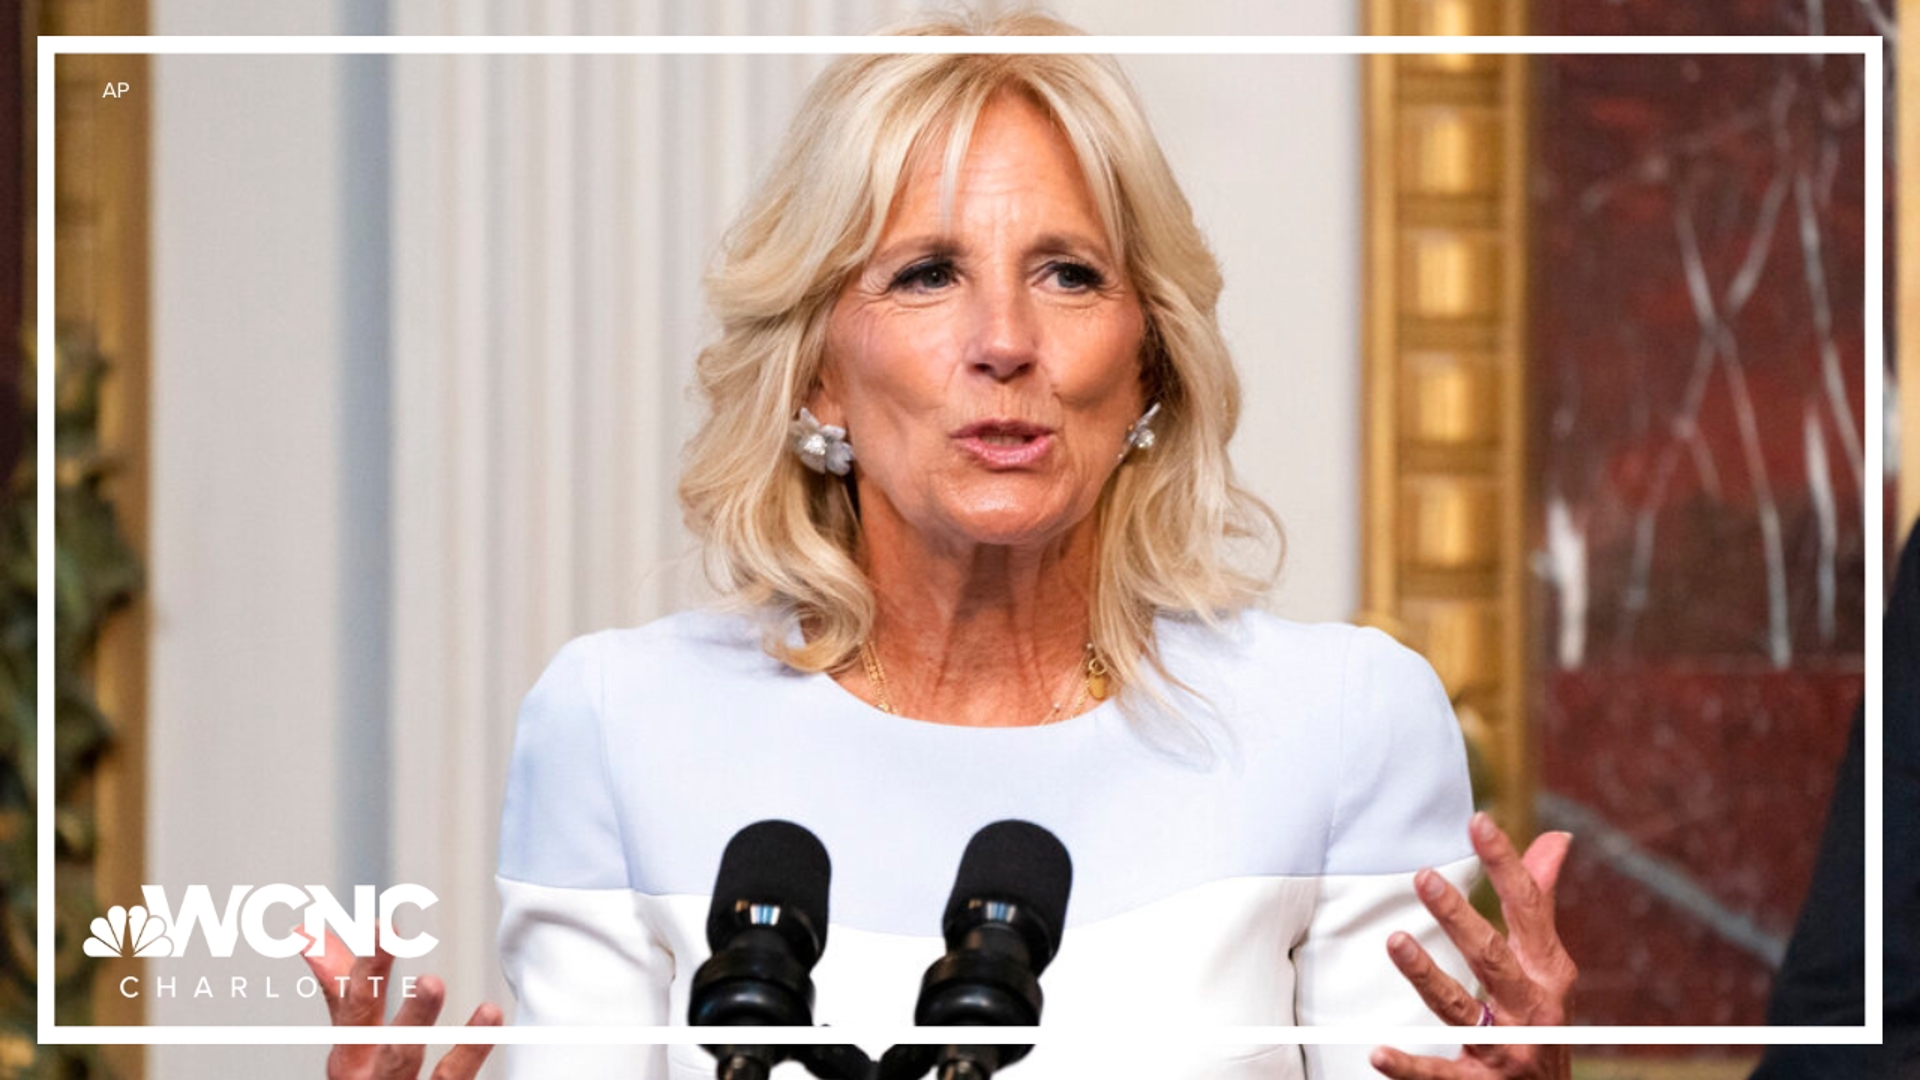 Jill Biden will be in Charlotte to deliver remarks at a political finance event.